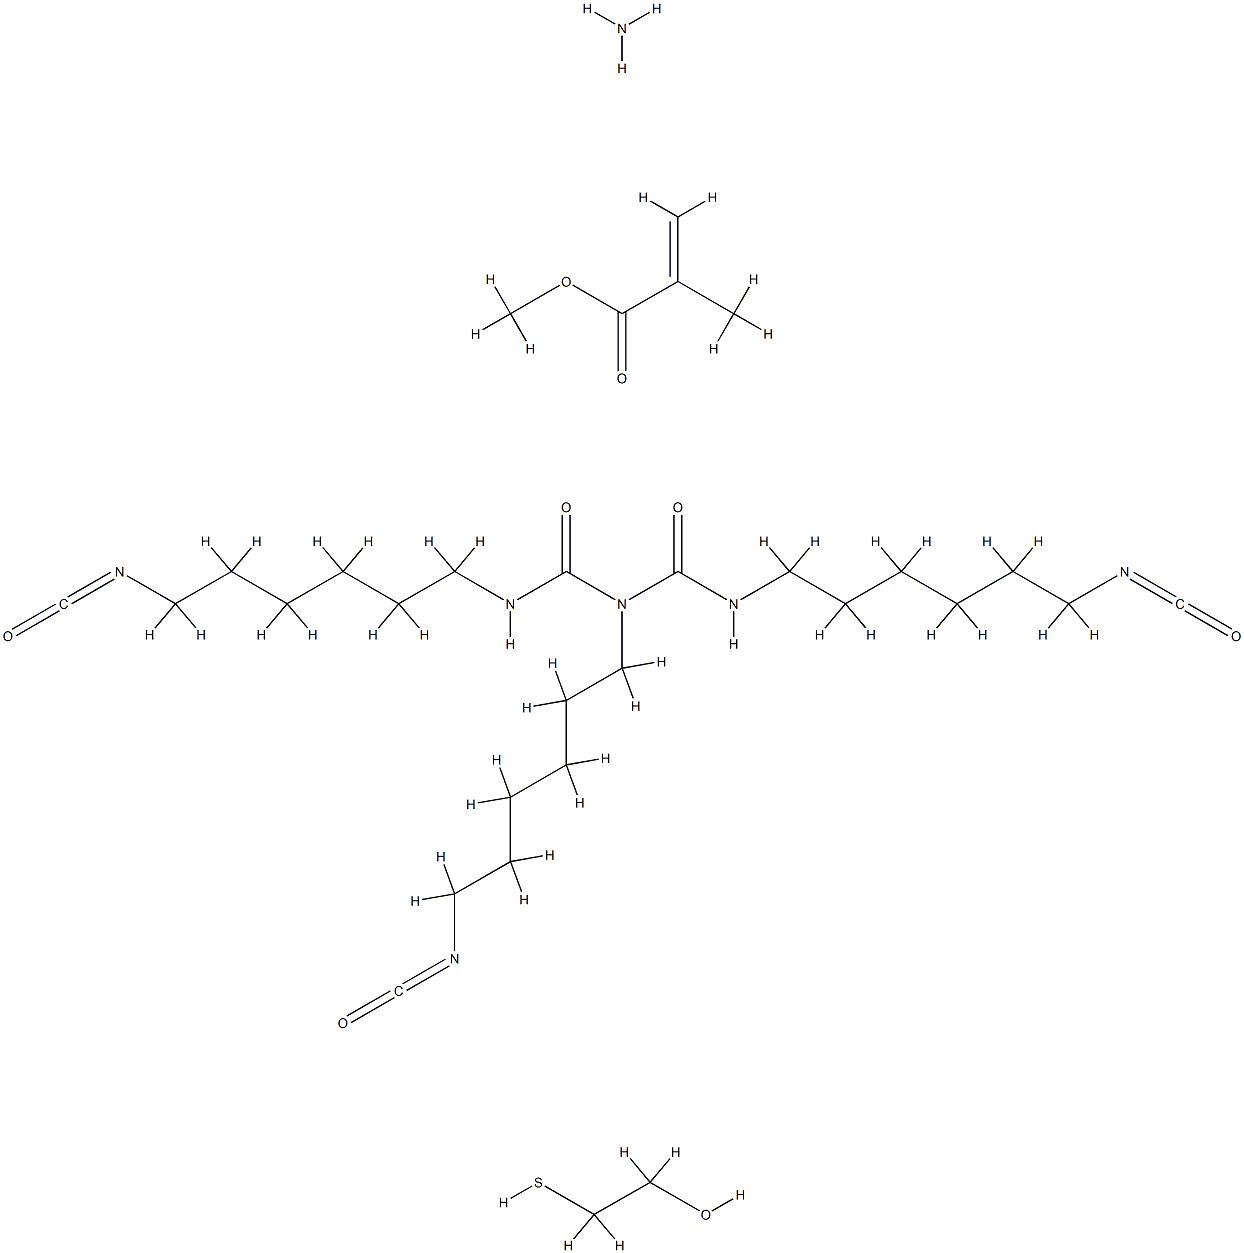 2-Propenoic acid, 2-methyl-, methyl ester, polymer with 2-mercaptoethanol, reaction products with ammonia and N,N',2-tris(6-isocyanatohexyl)imidodicarbonic diamide 구조식 이미지